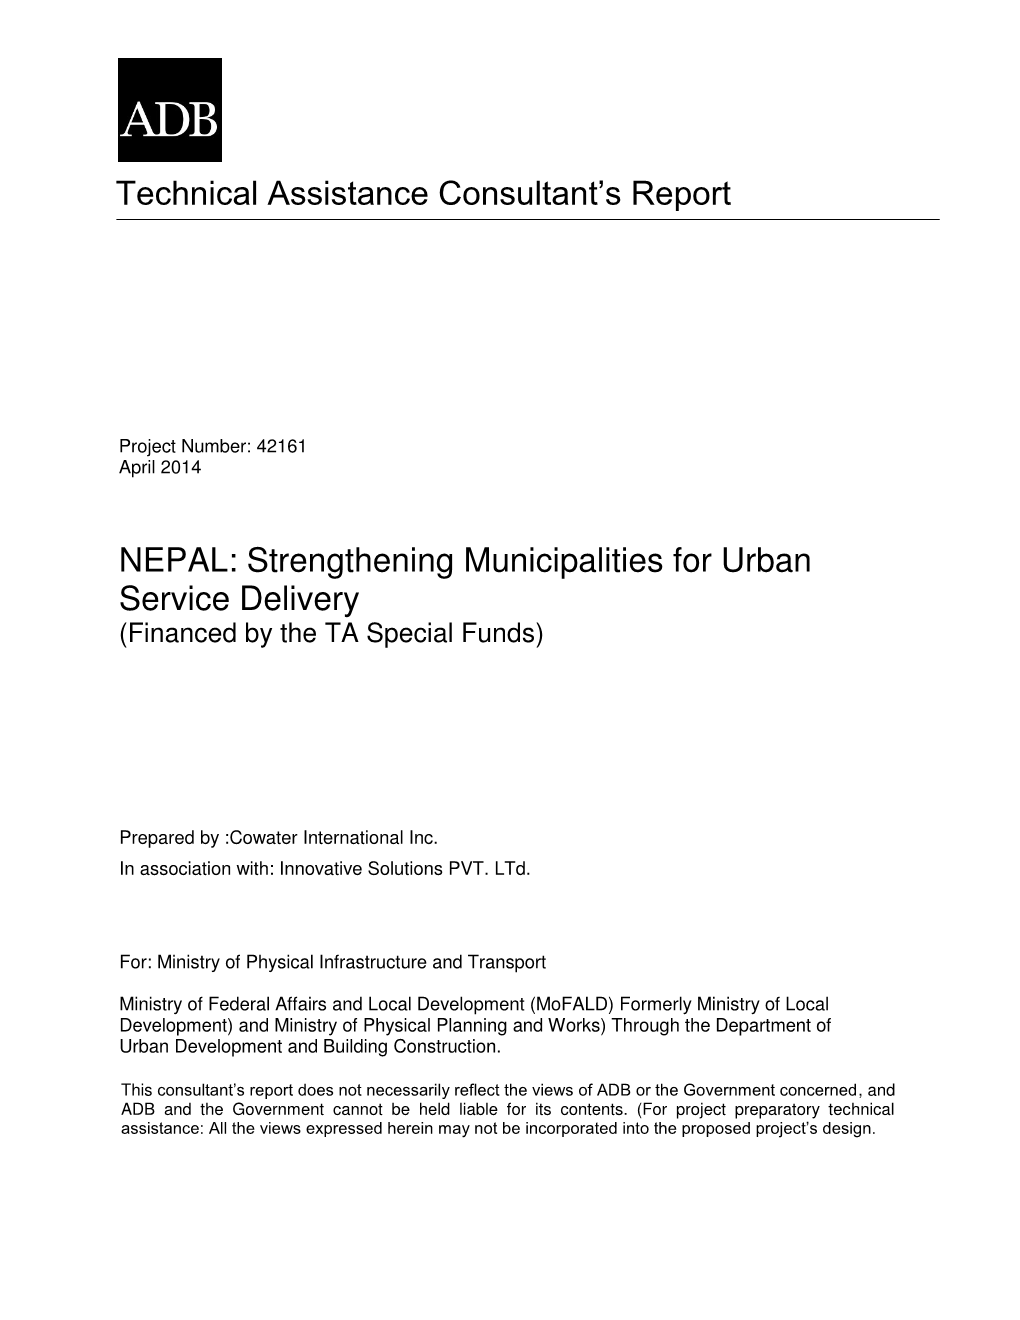 NEPAL: Strengthening Municipalities for Urban Service Delivery (Financed by the TA Special Funds)